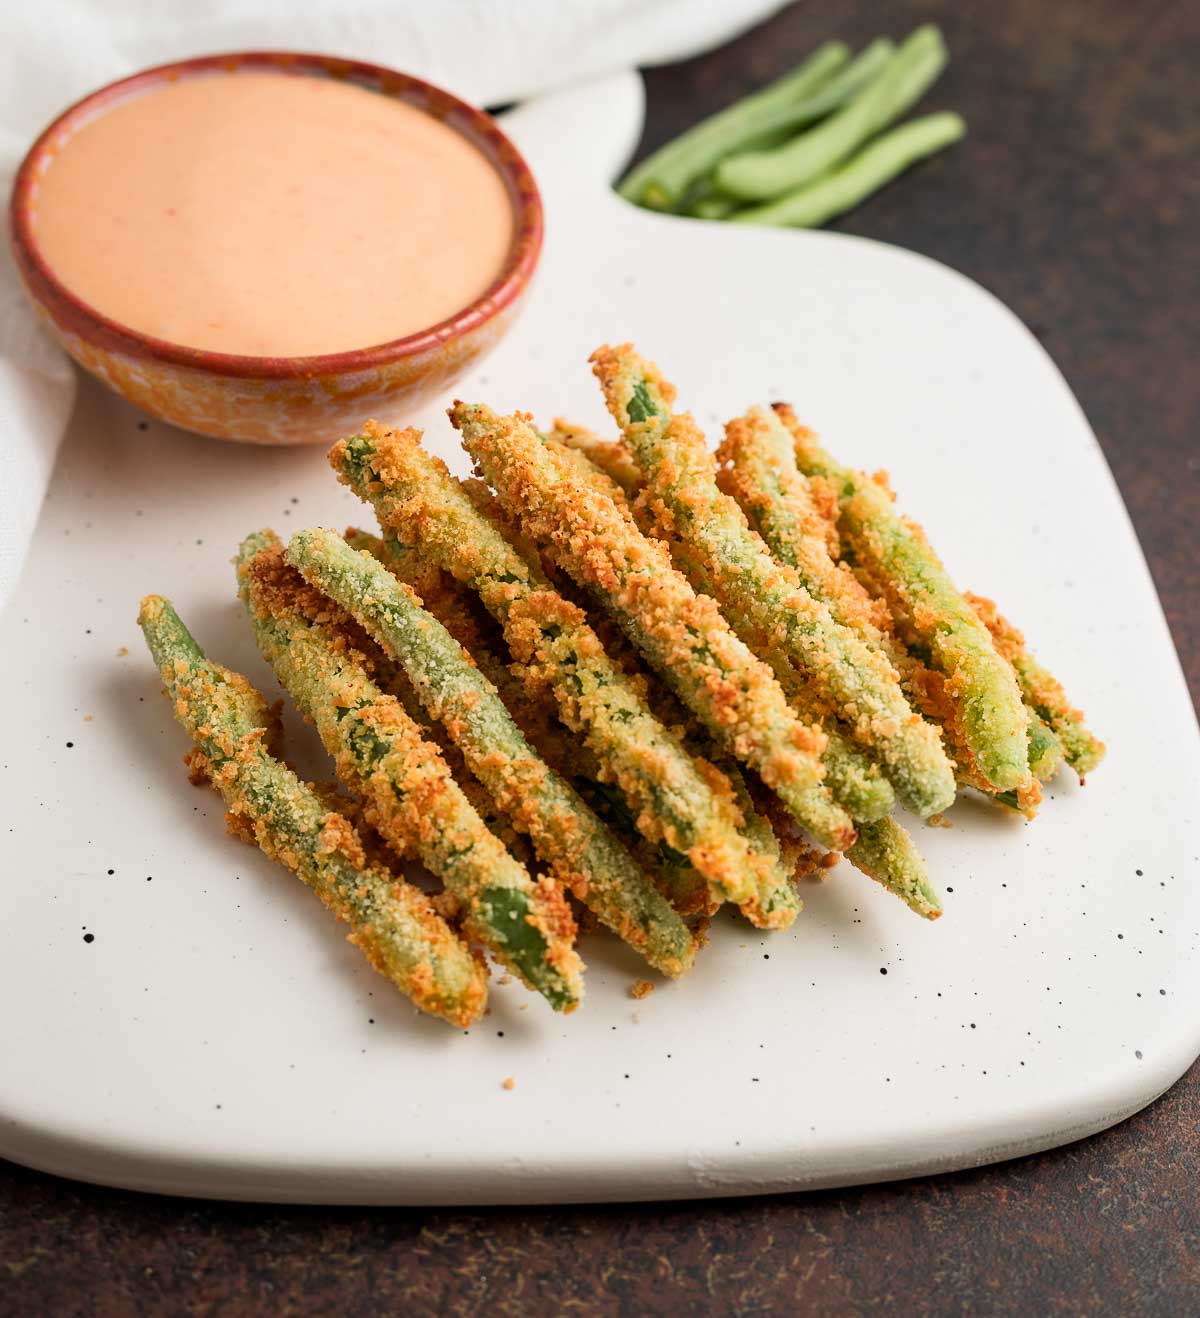 Air-fried green beans with a side of dipping sauce.